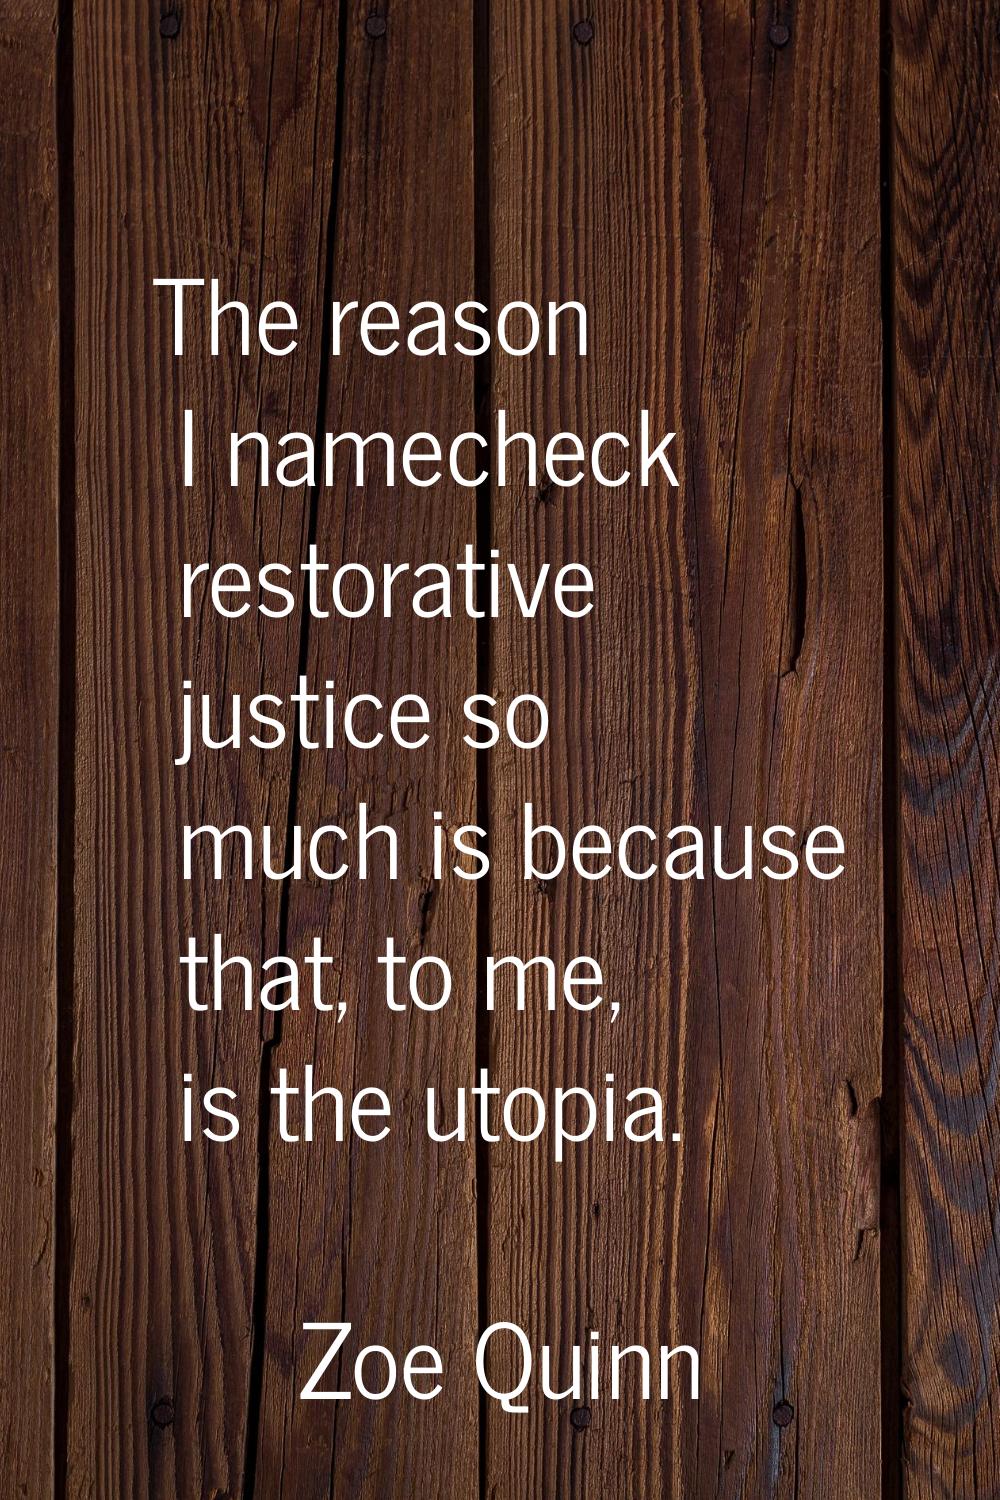 The reason I namecheck restorative justice so much is because that, to me, is the utopia.